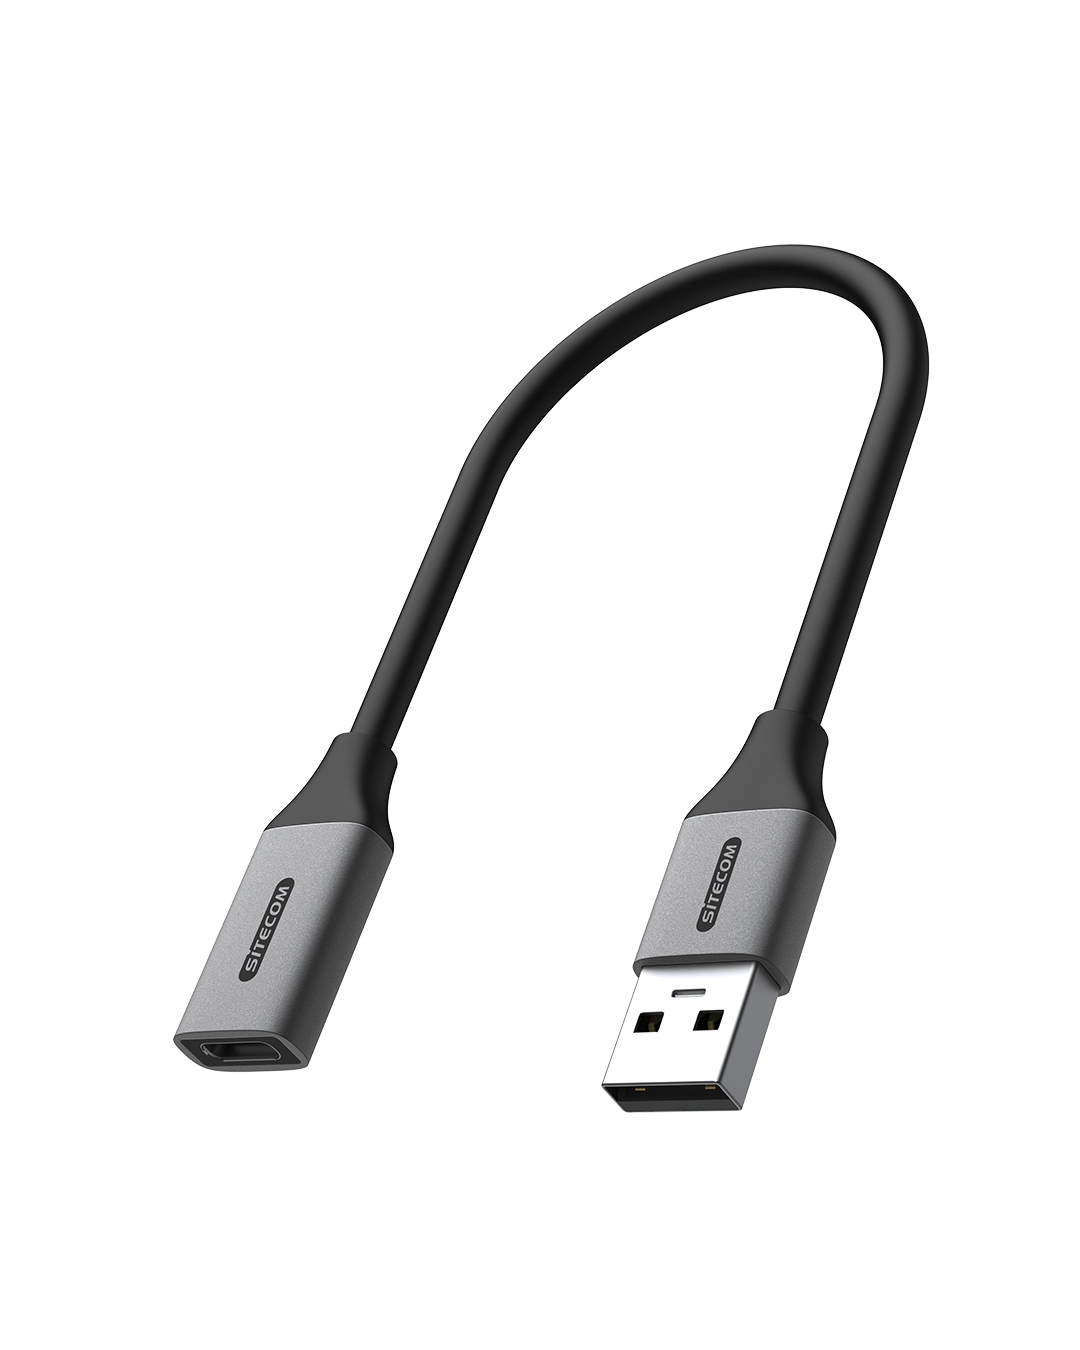 Introduction to USB-A, USB-C, Lightning, and Micro-USB ports